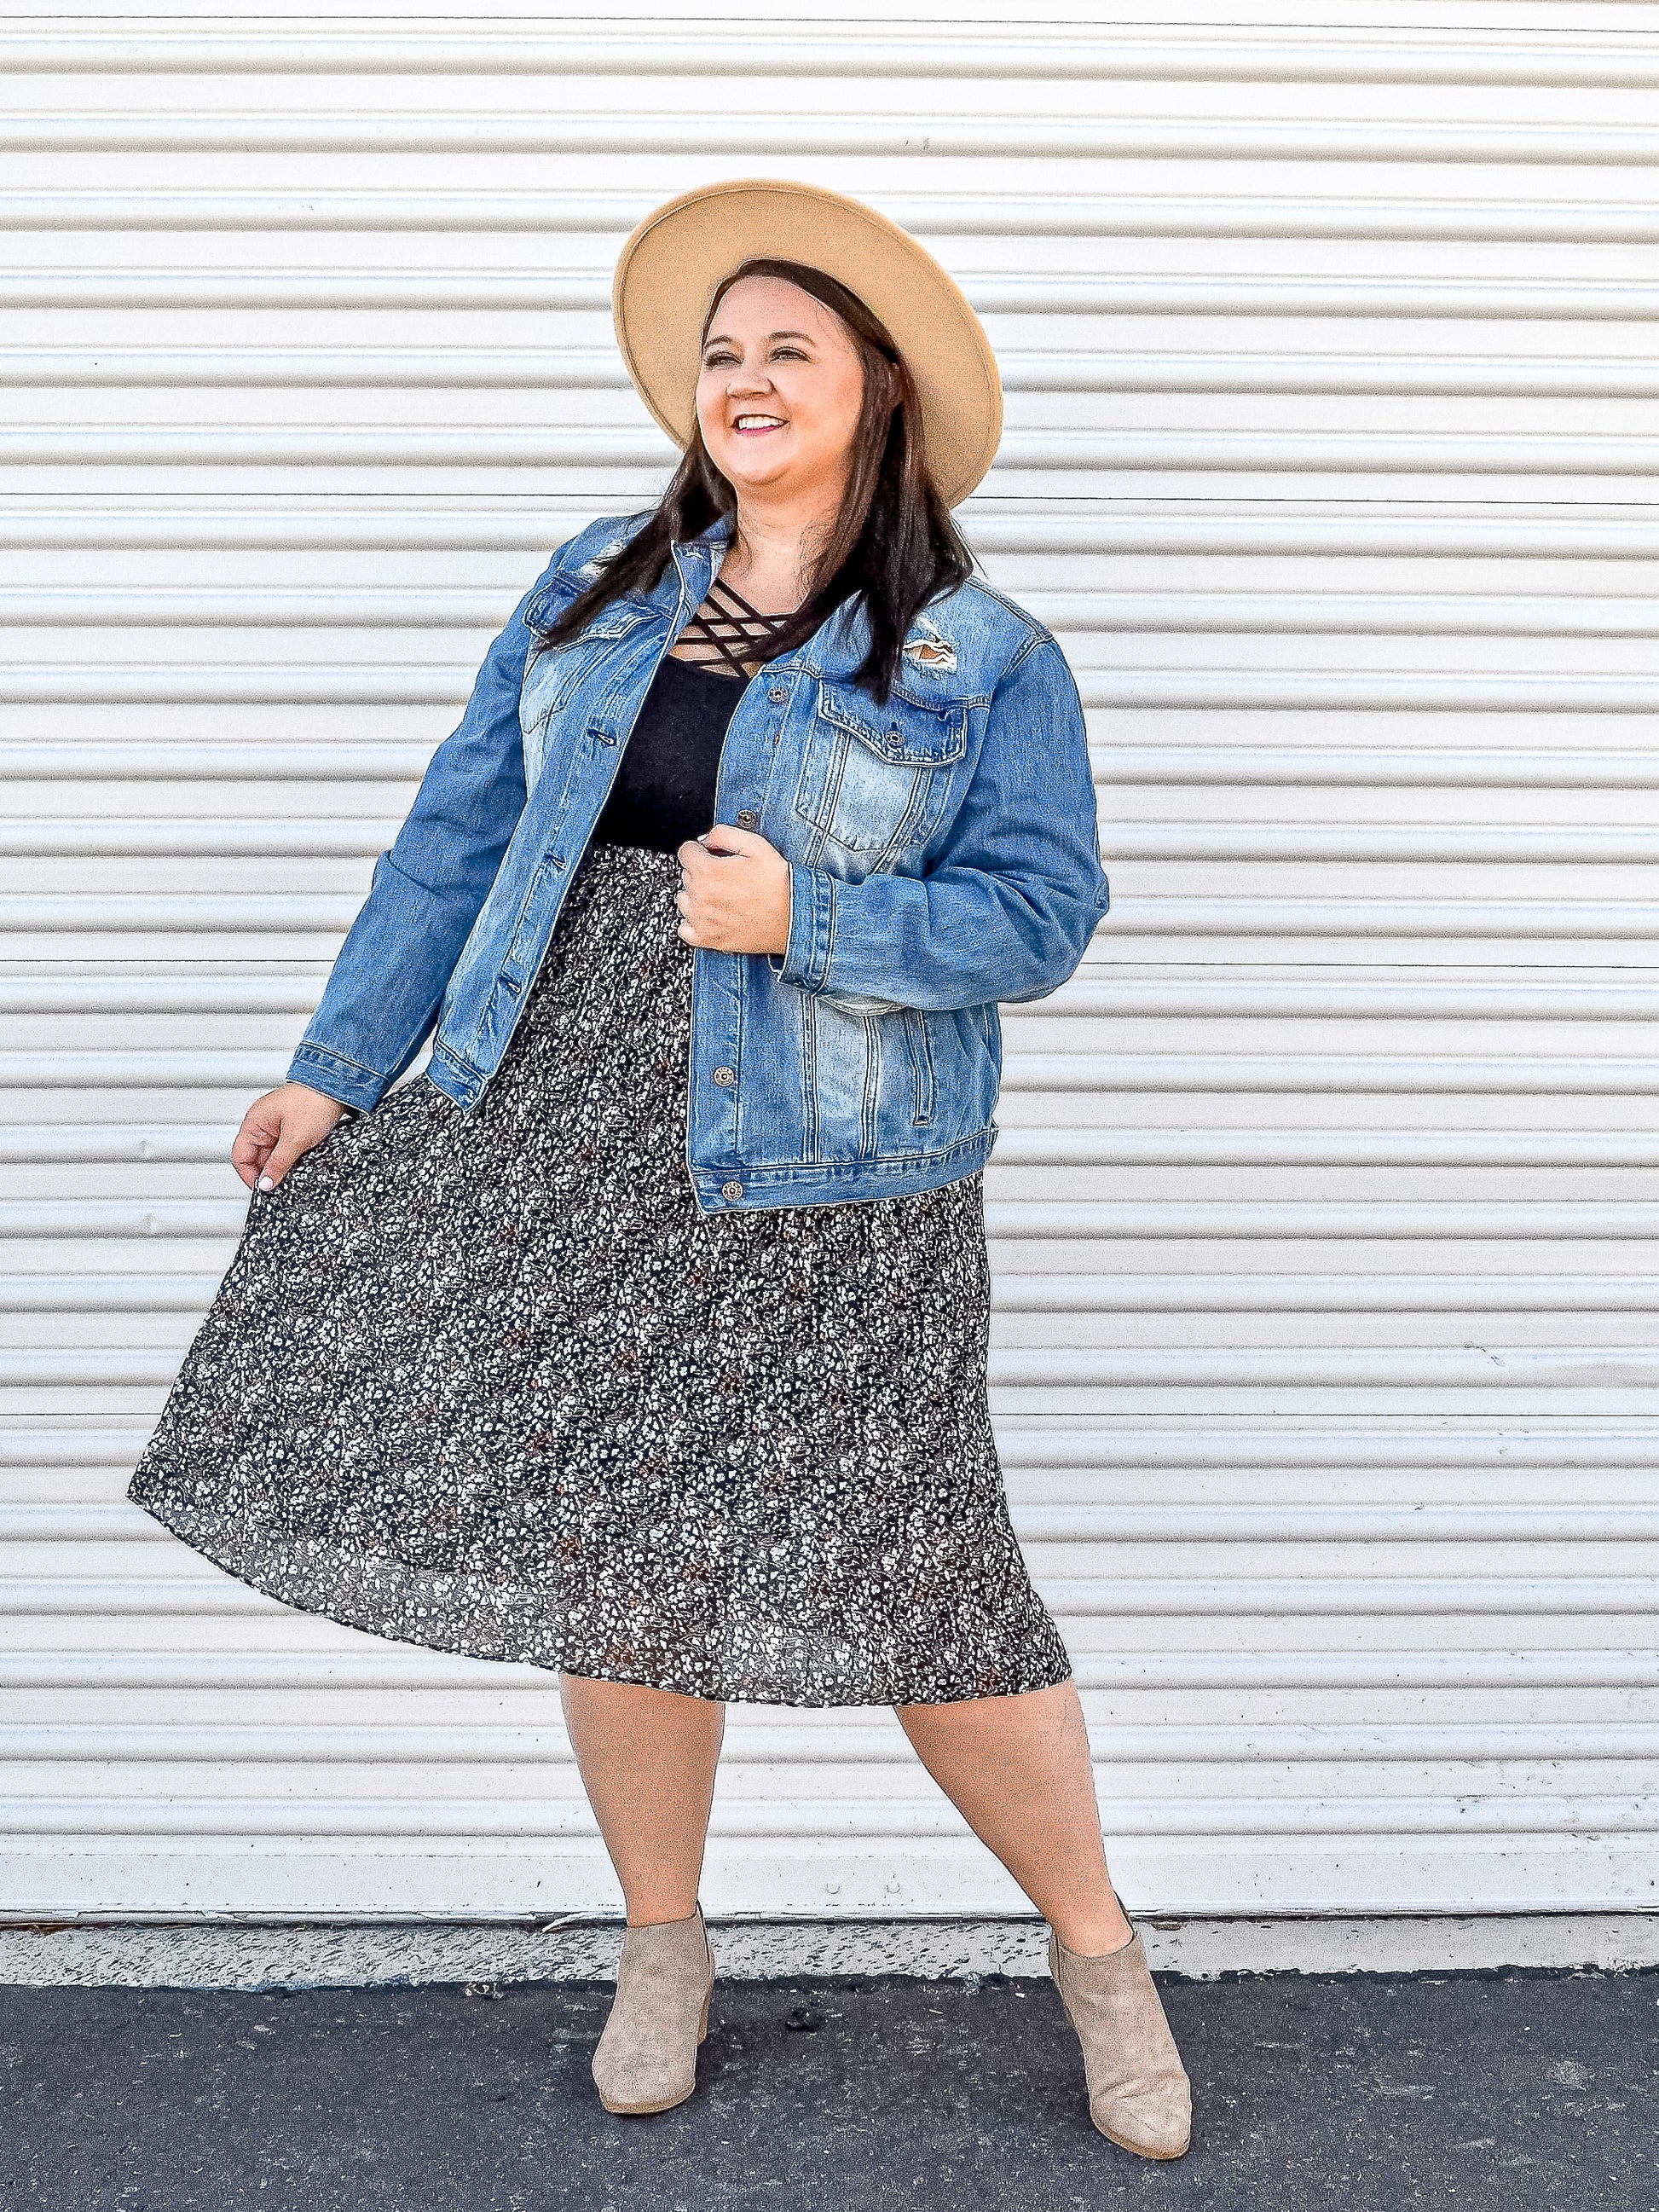 Floral skirt dressed up with a denim jacket and hat